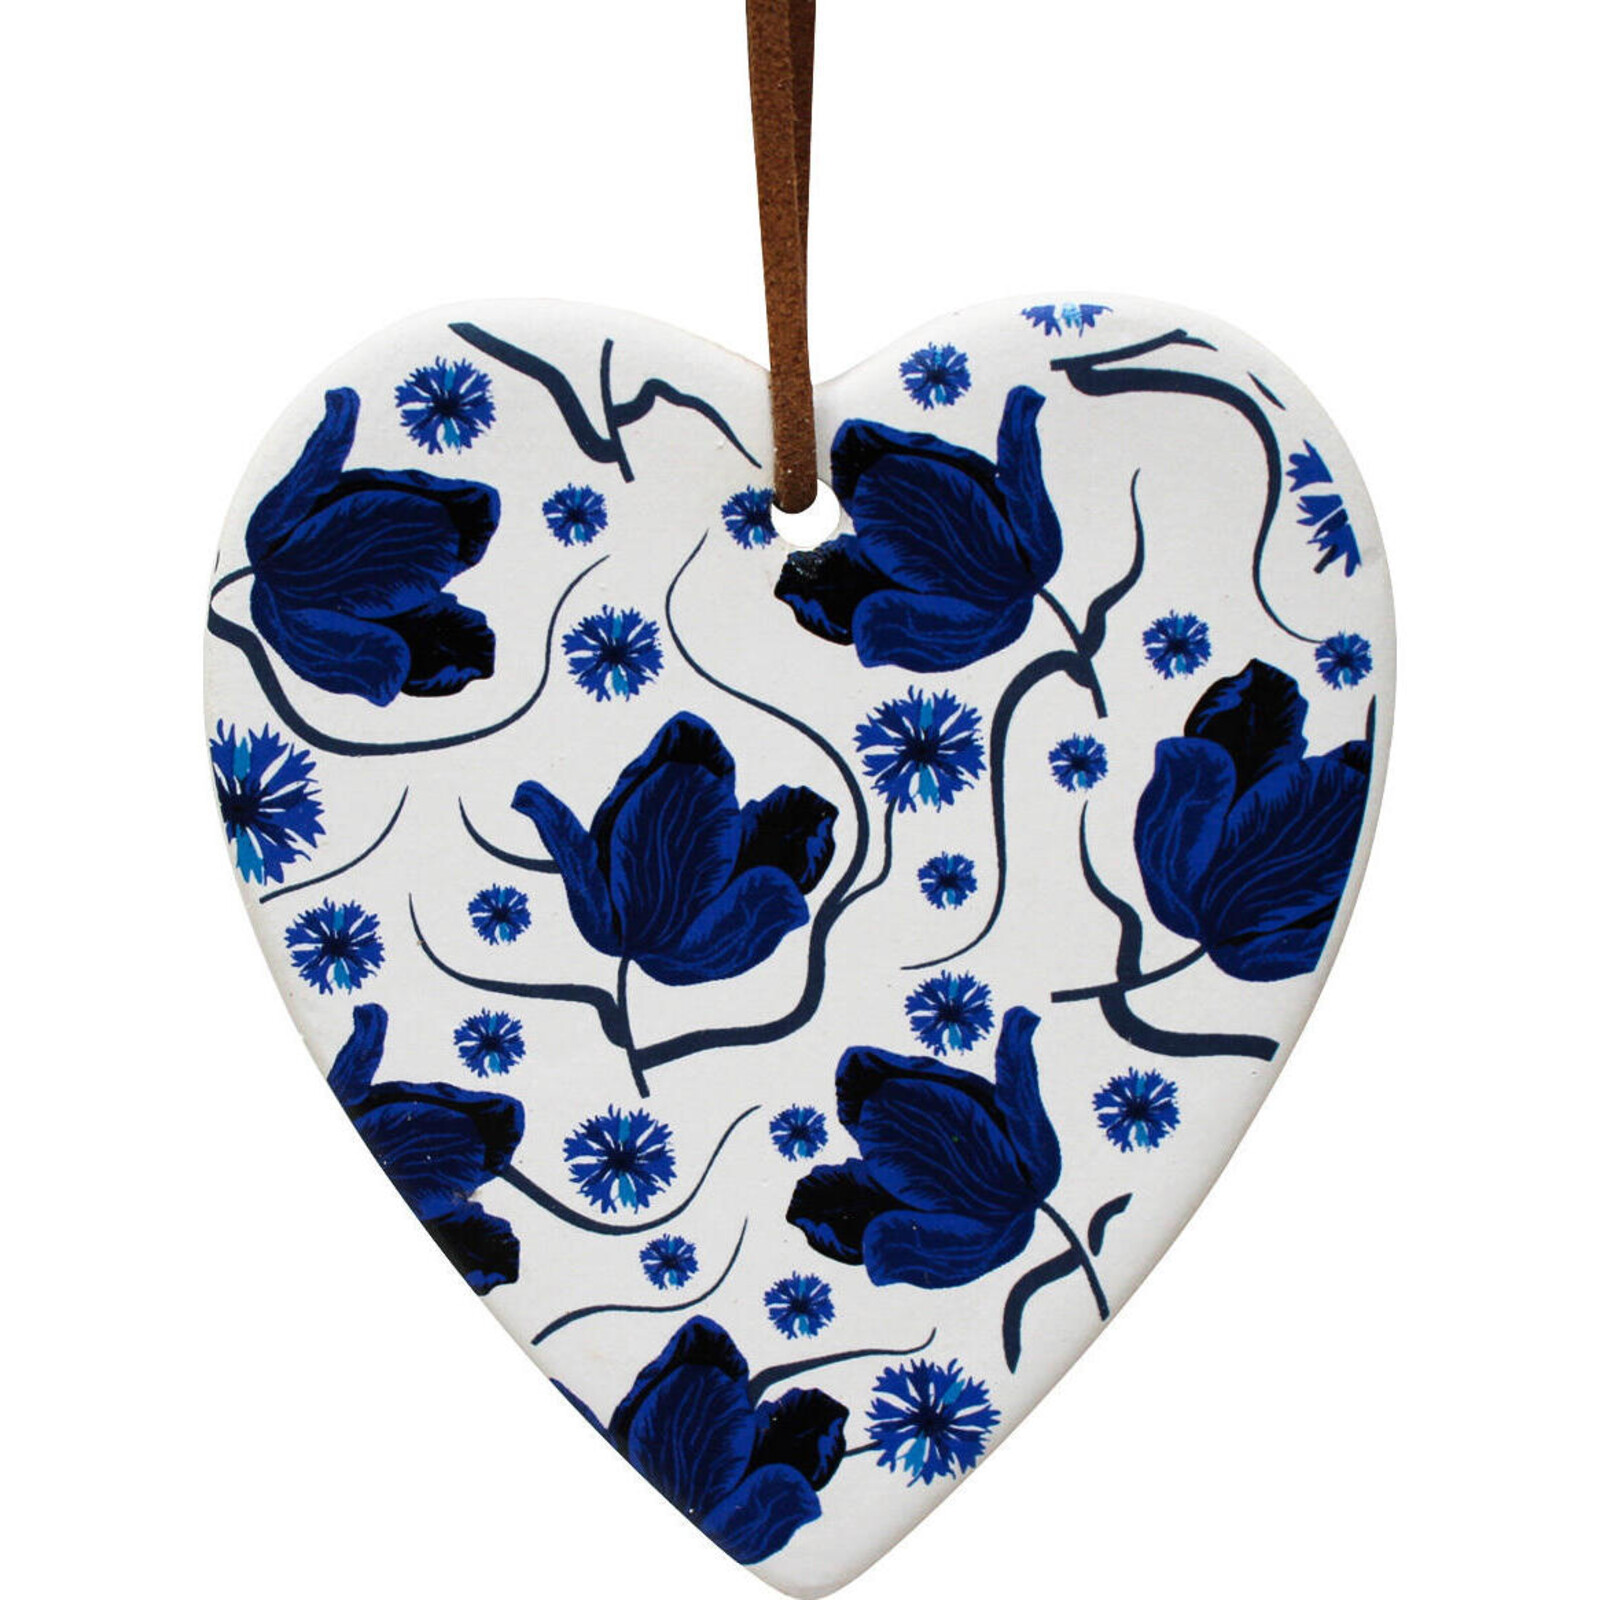 Hanging Heart Pattern Navy Floral